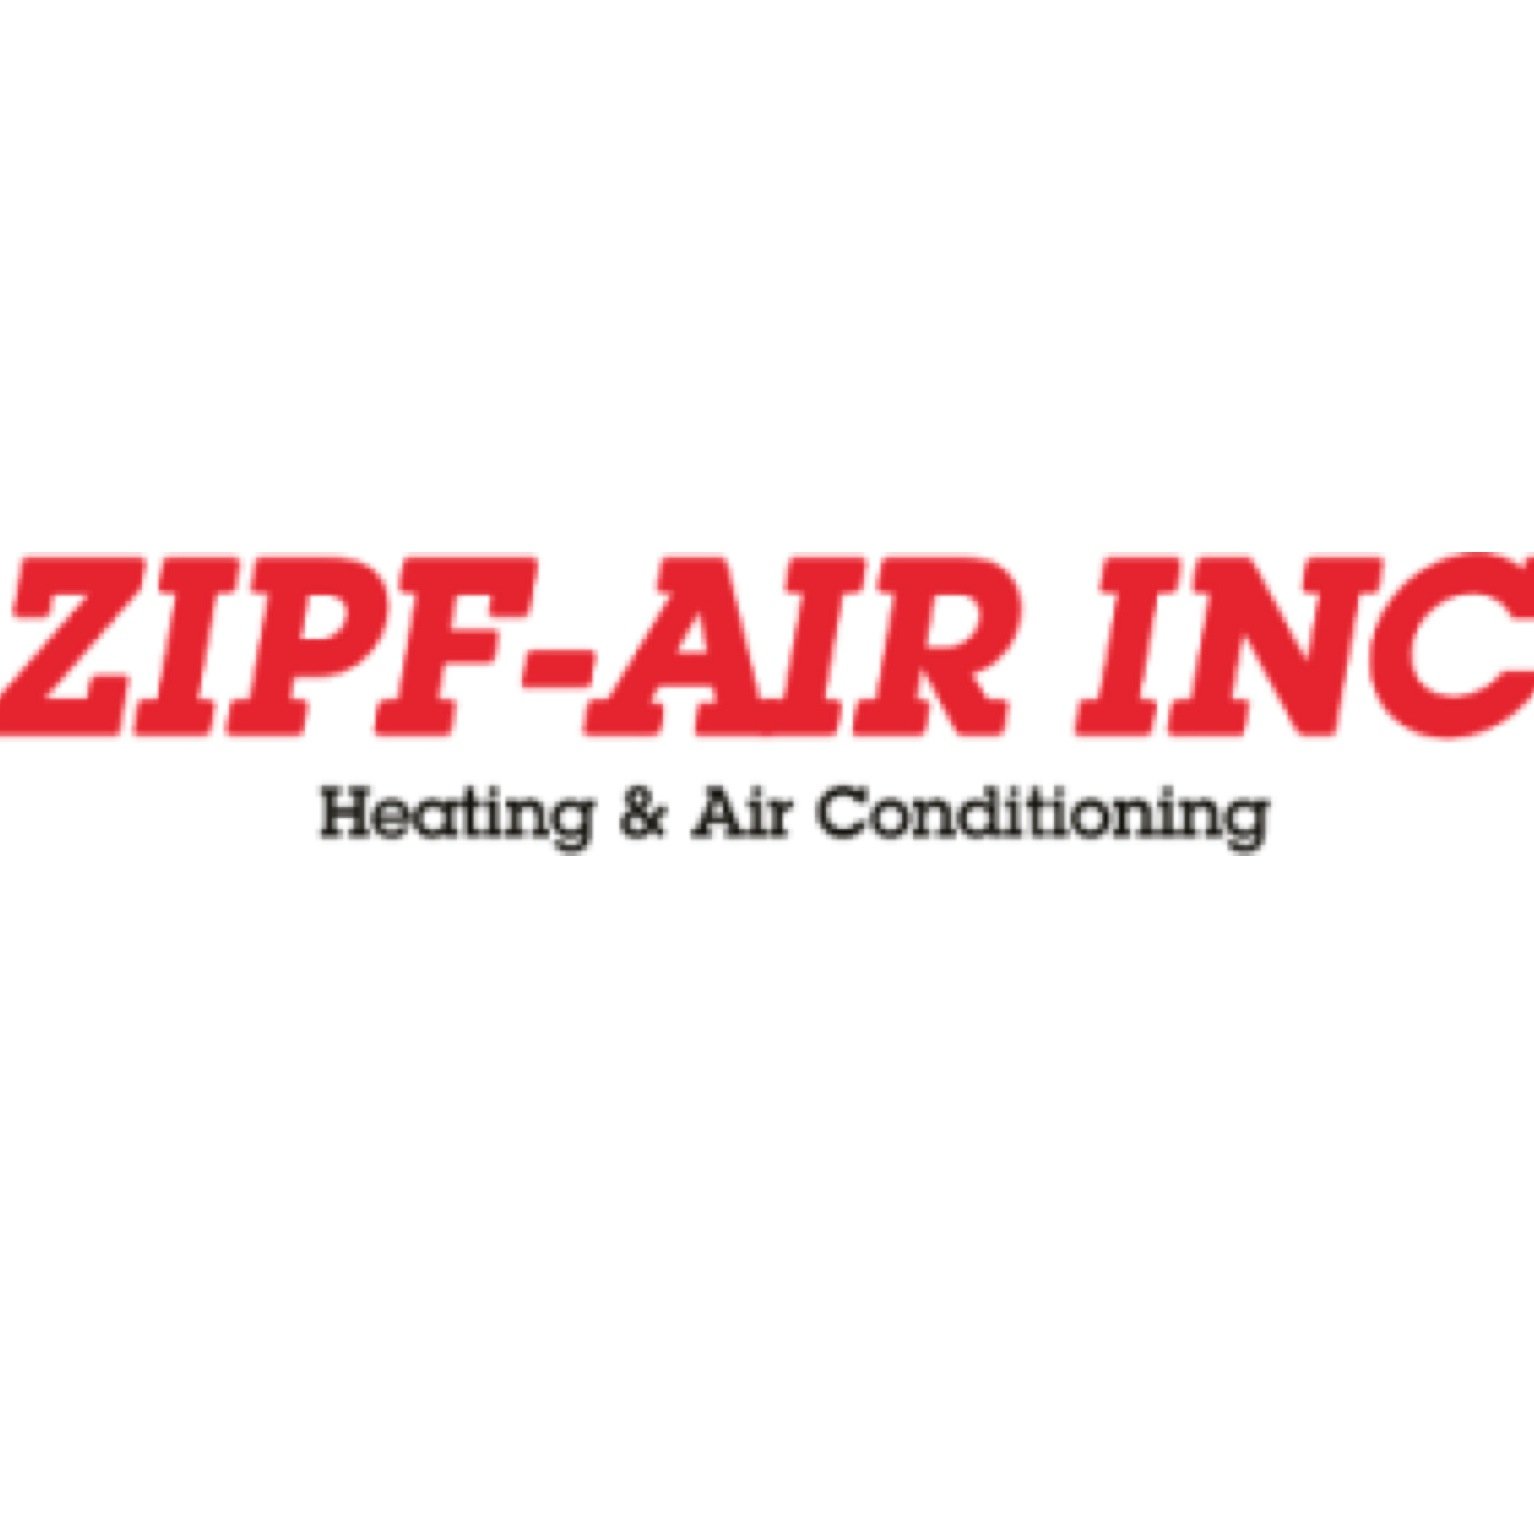 Premier HVAC company in St. Louis & #Kirkwood #Missouri! Established in 1987 - Zipf Air takes care of all your #heating & #cooling needs! (314) 821-1200